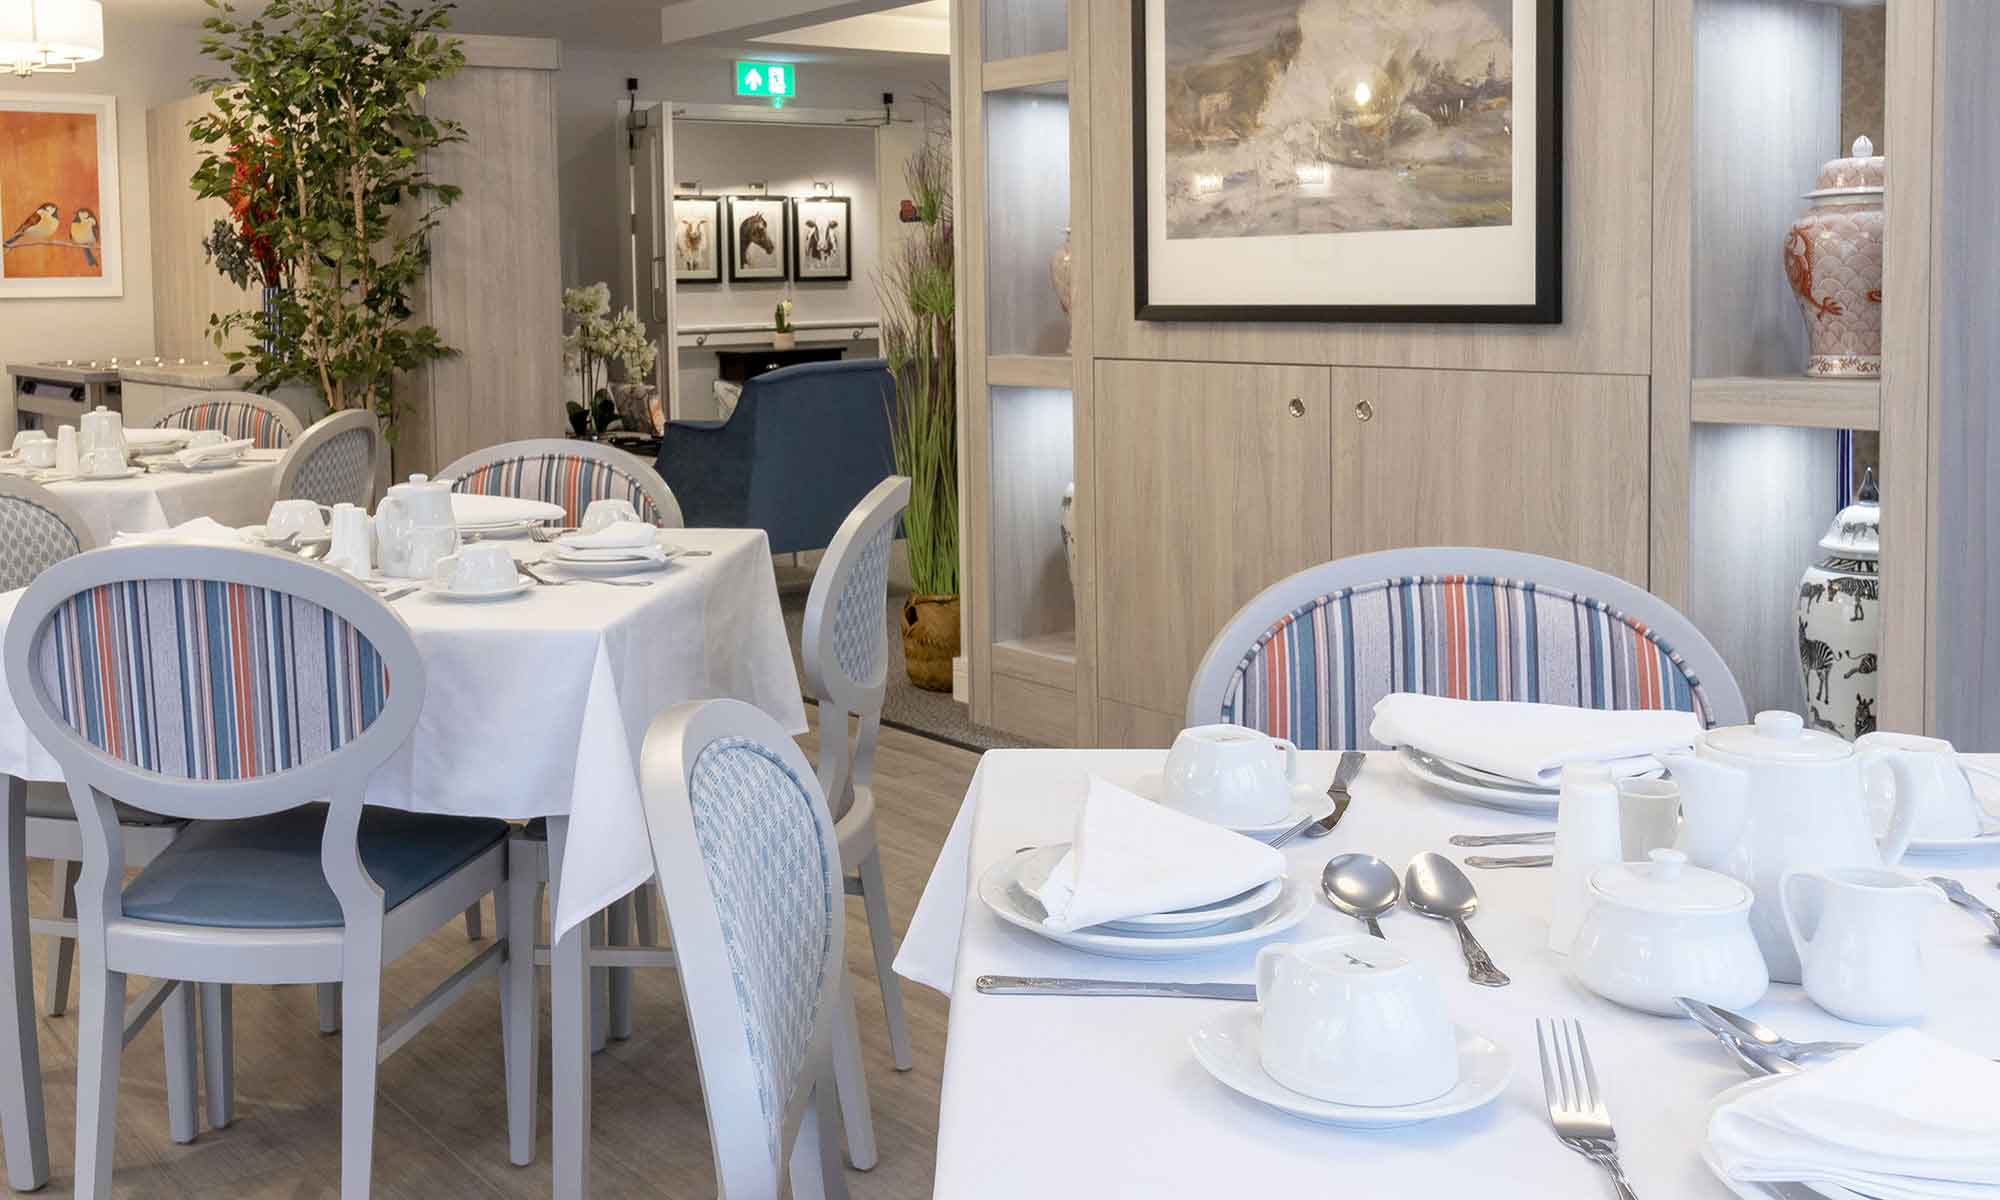 A dining room interior at St Mary's Care Home . A close up of a dining table set up with white tableware and silver cutlery. Featuring a Sesto side chair upholstered in a contrast stripe fabric. A large piece of artwork above bespoke in-built storage cupboards.